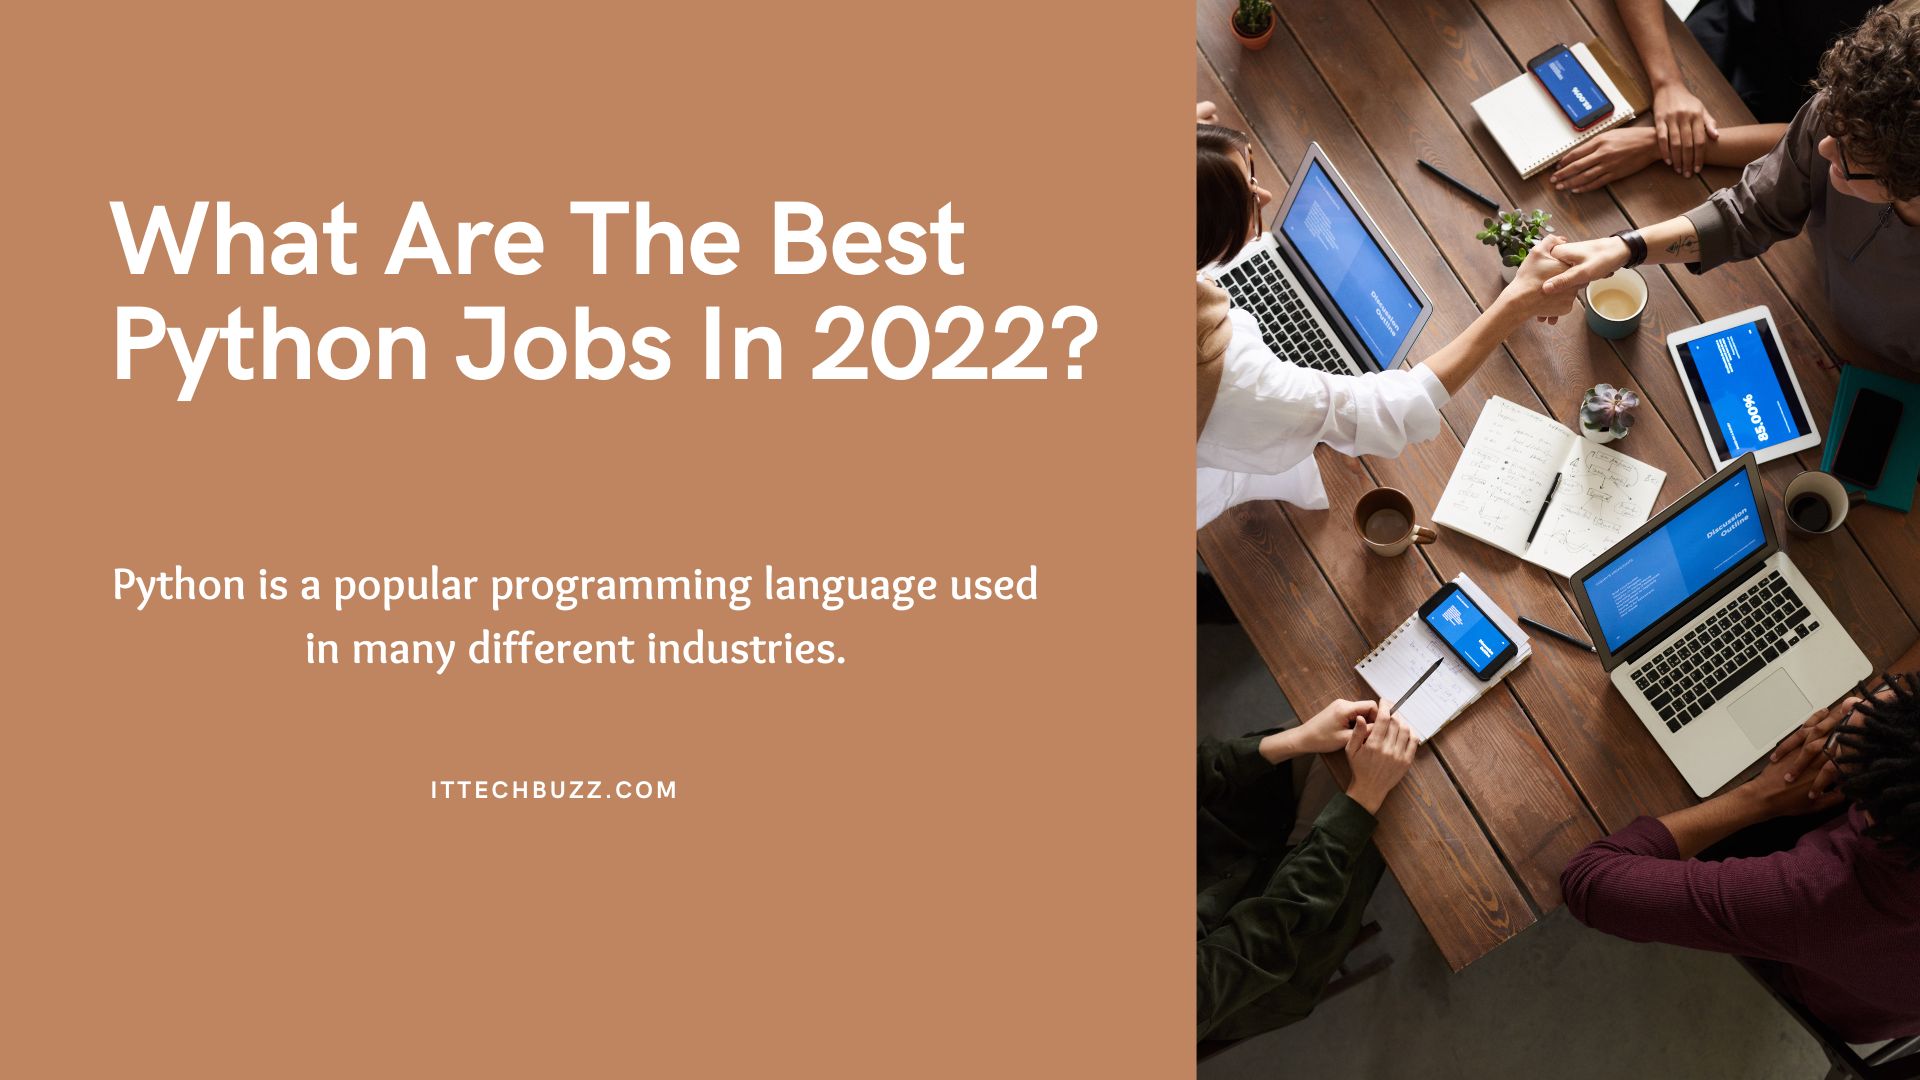 What Are The Best Python Jobs In 2022?